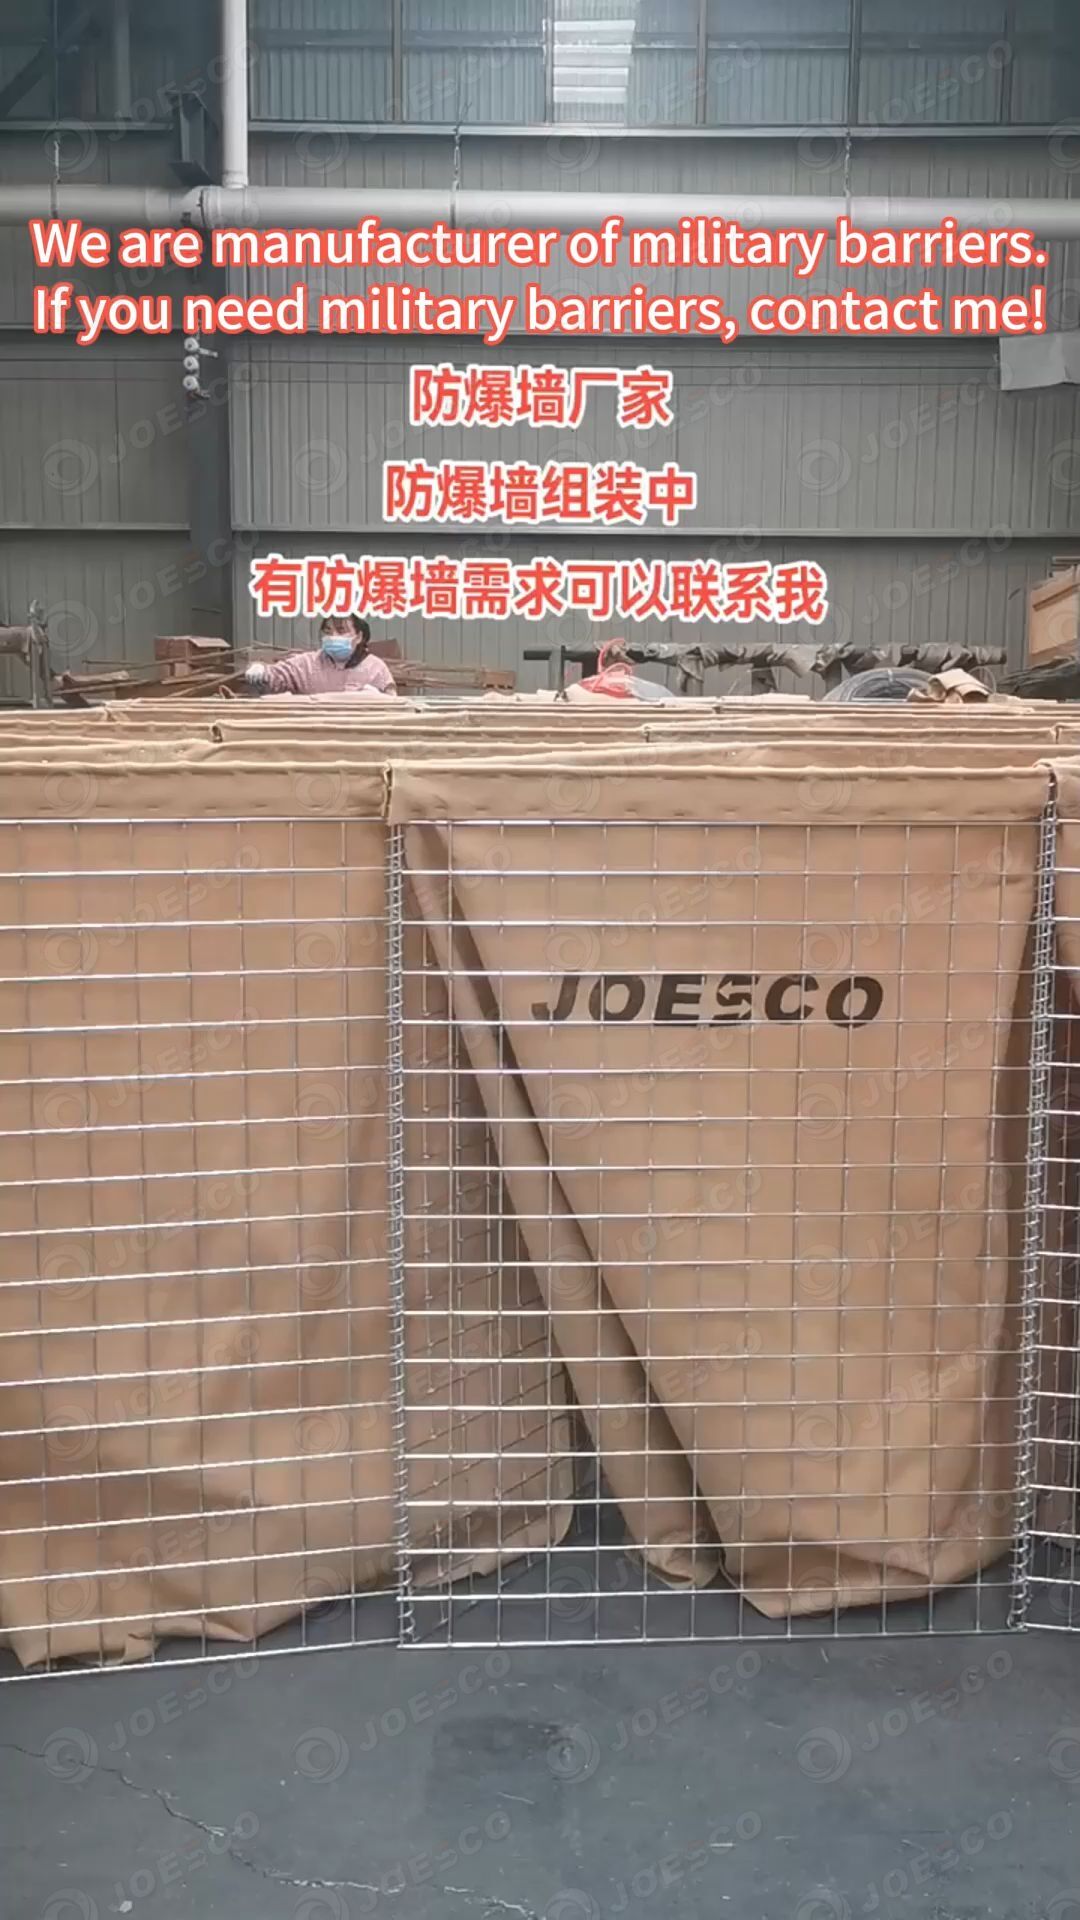 We are manufacturer of military barriers. If you need military barriers, contact me thumbnail 1